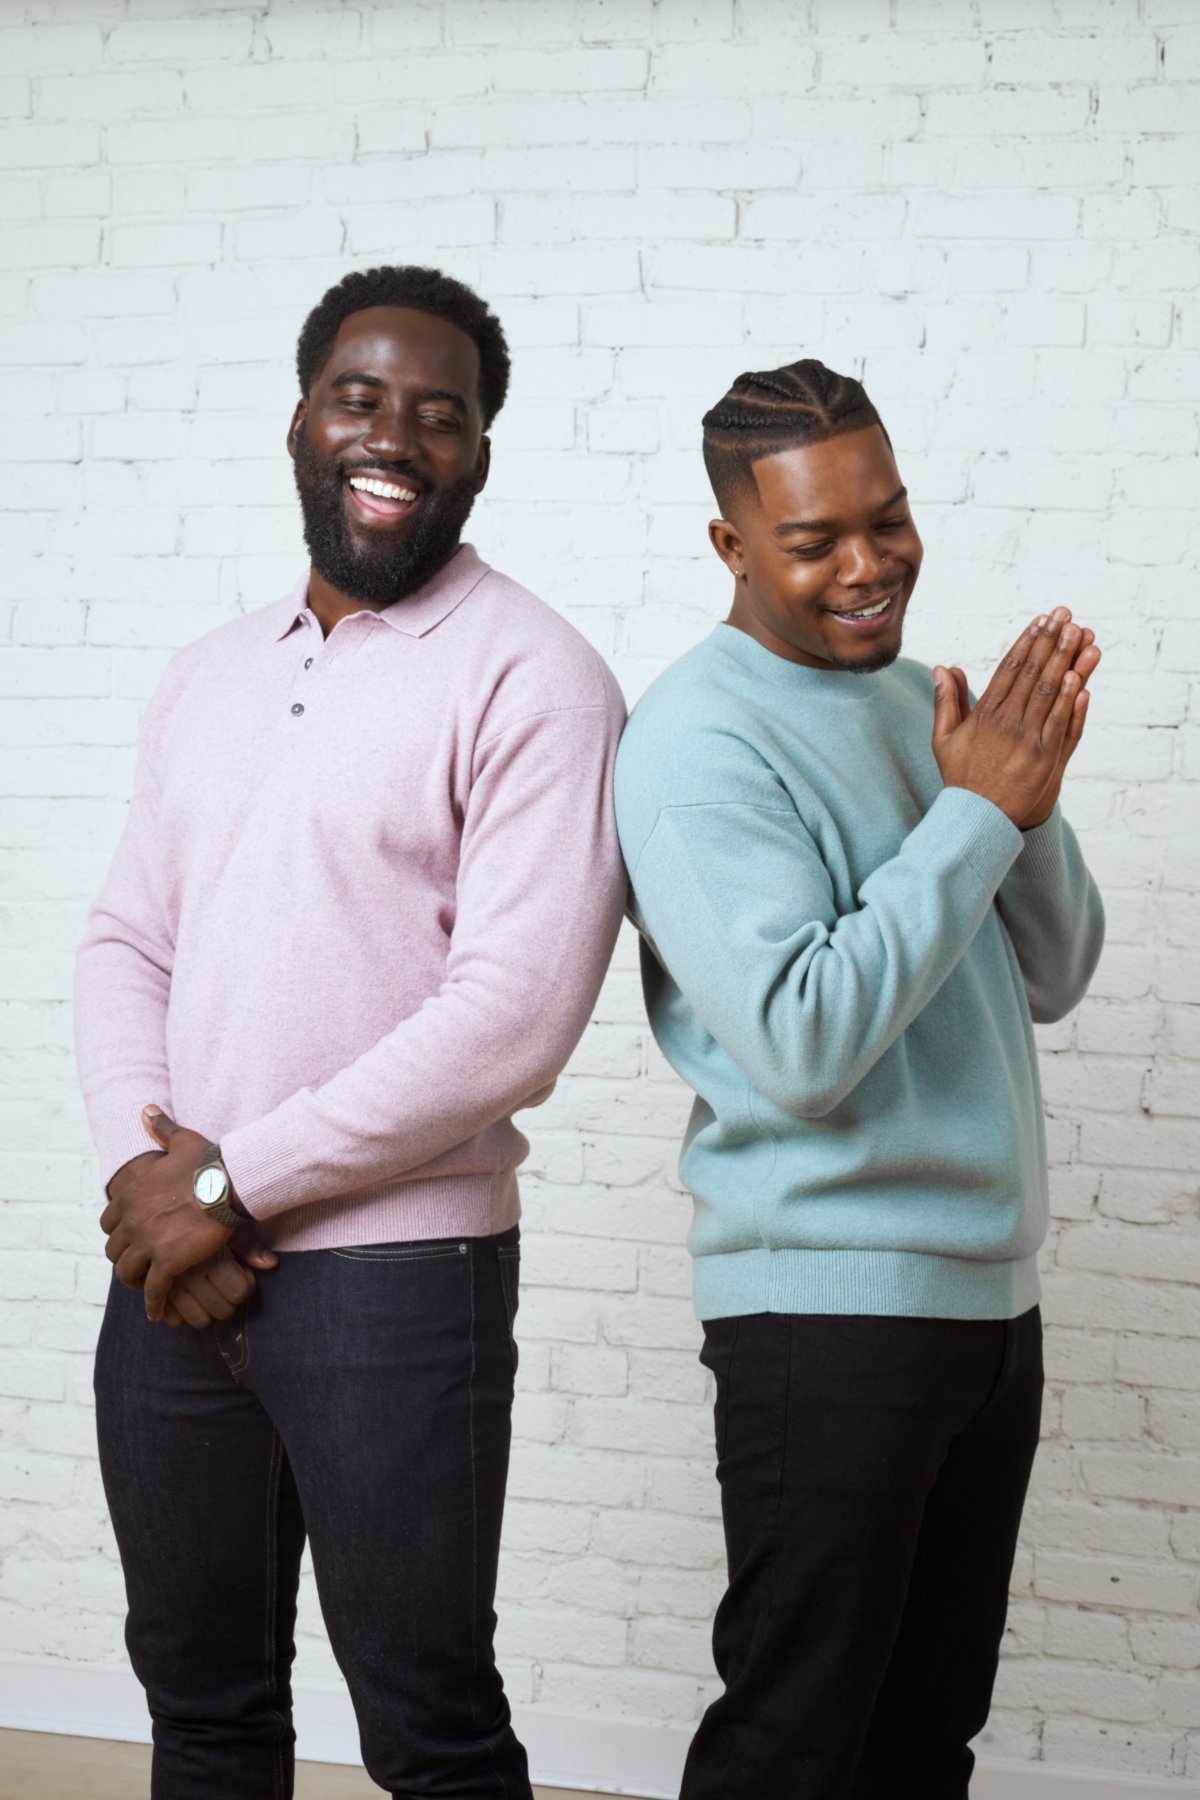 Canadian actor-brothers, Shamier Anderson and Stephan James launch The Black Academy to shine a spotlight on emerging Black talent and break down systemic racism barriers in the industry.